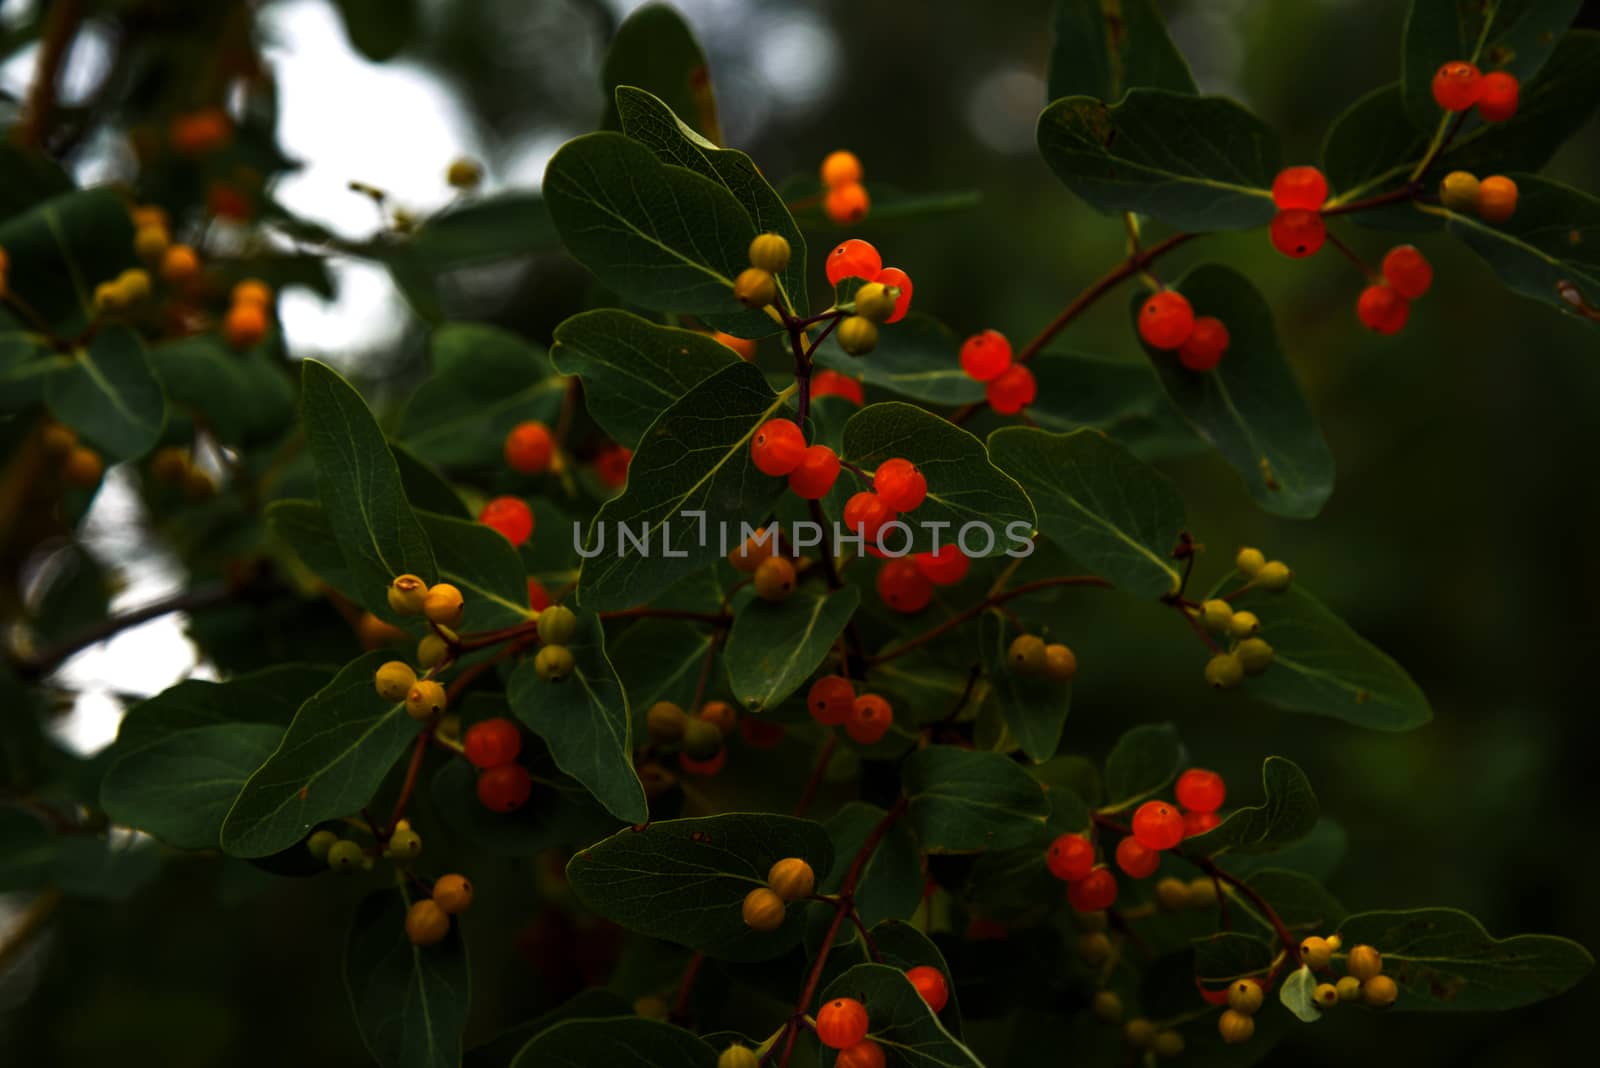 Honeysuckle (Lonicera xylosteum) yellow and red berries by WolfWilhelm